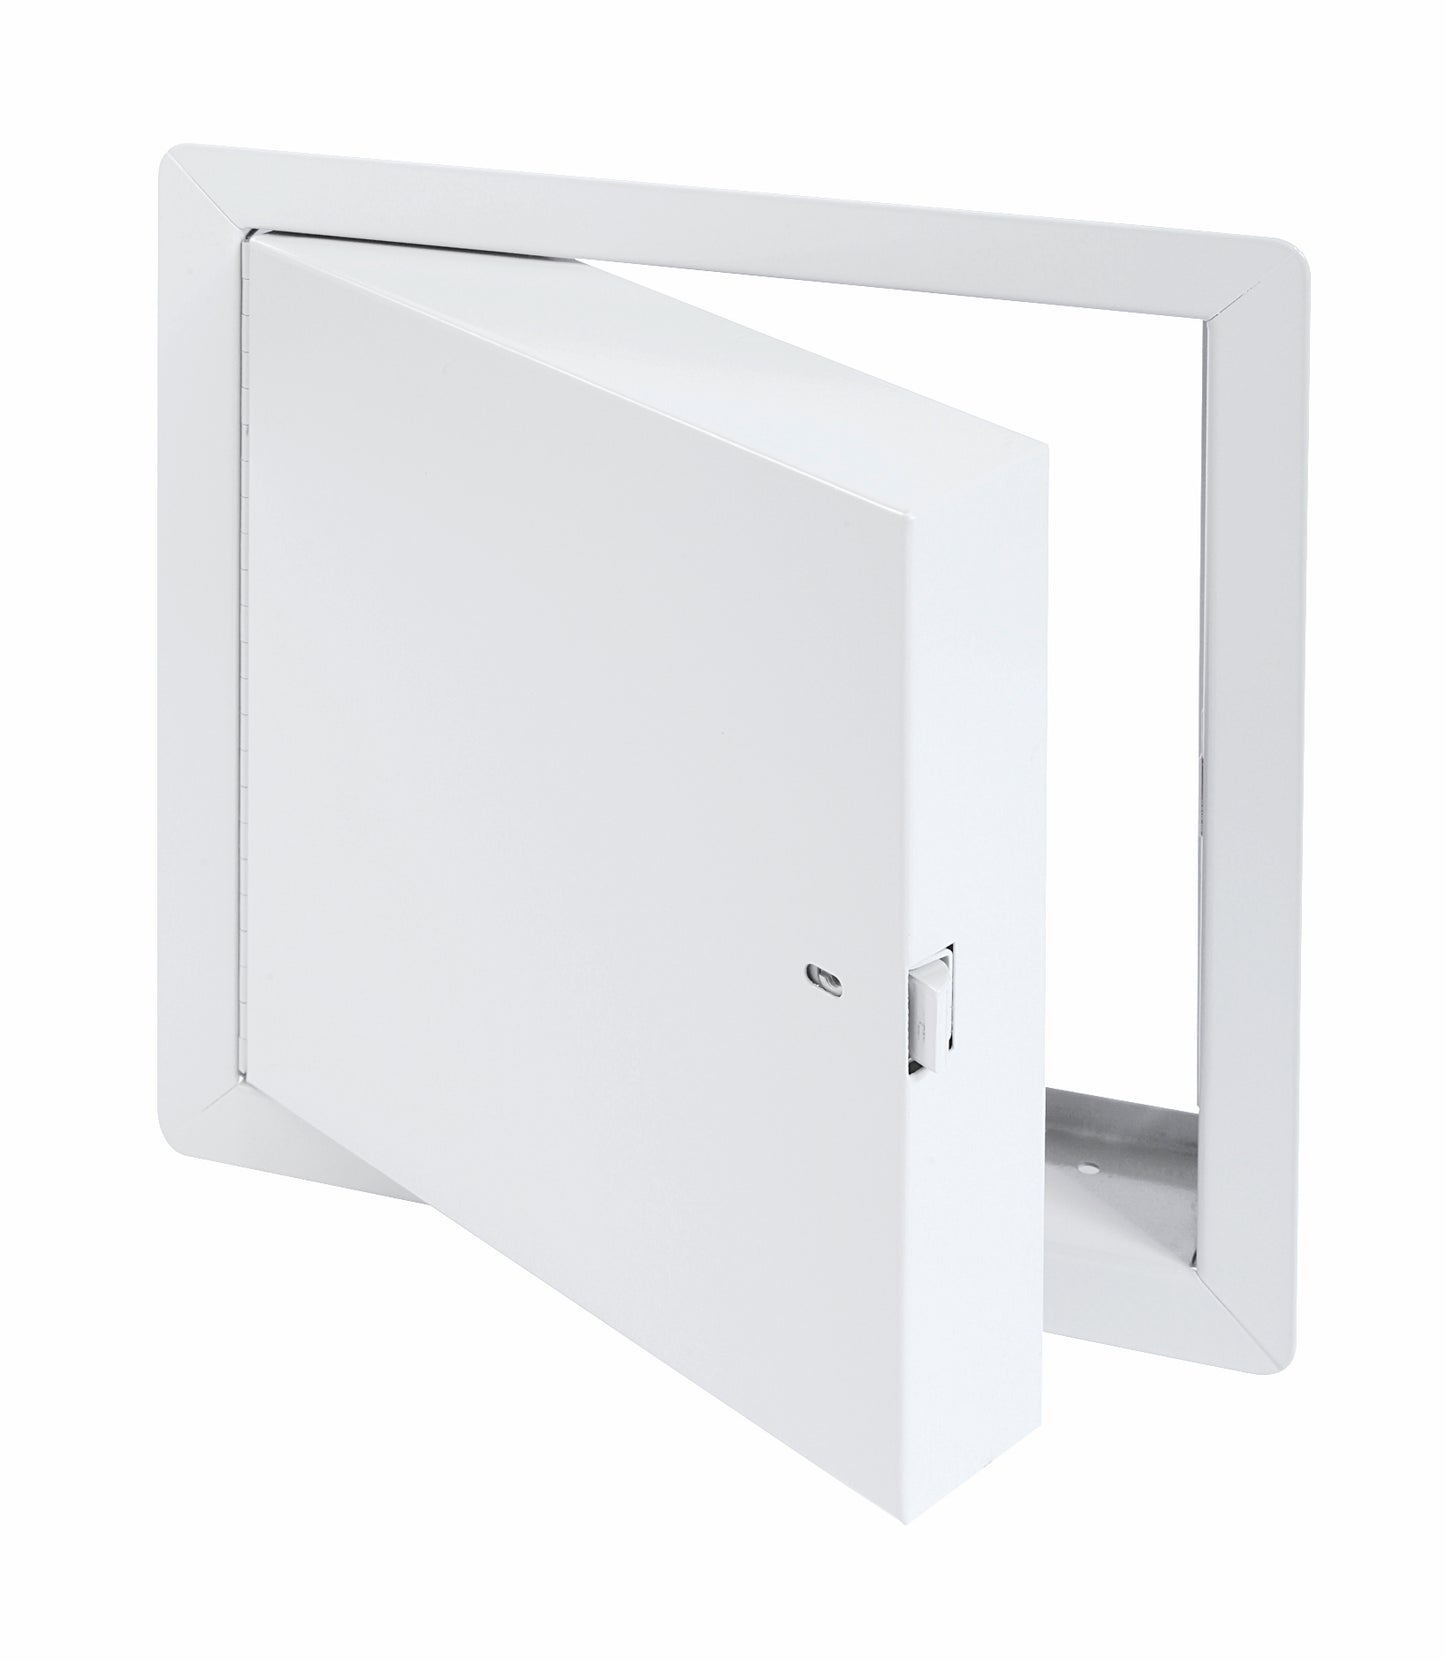 18"x18" Fire-rated Uninsulated Access Door with Drywall Flange, Cendrex